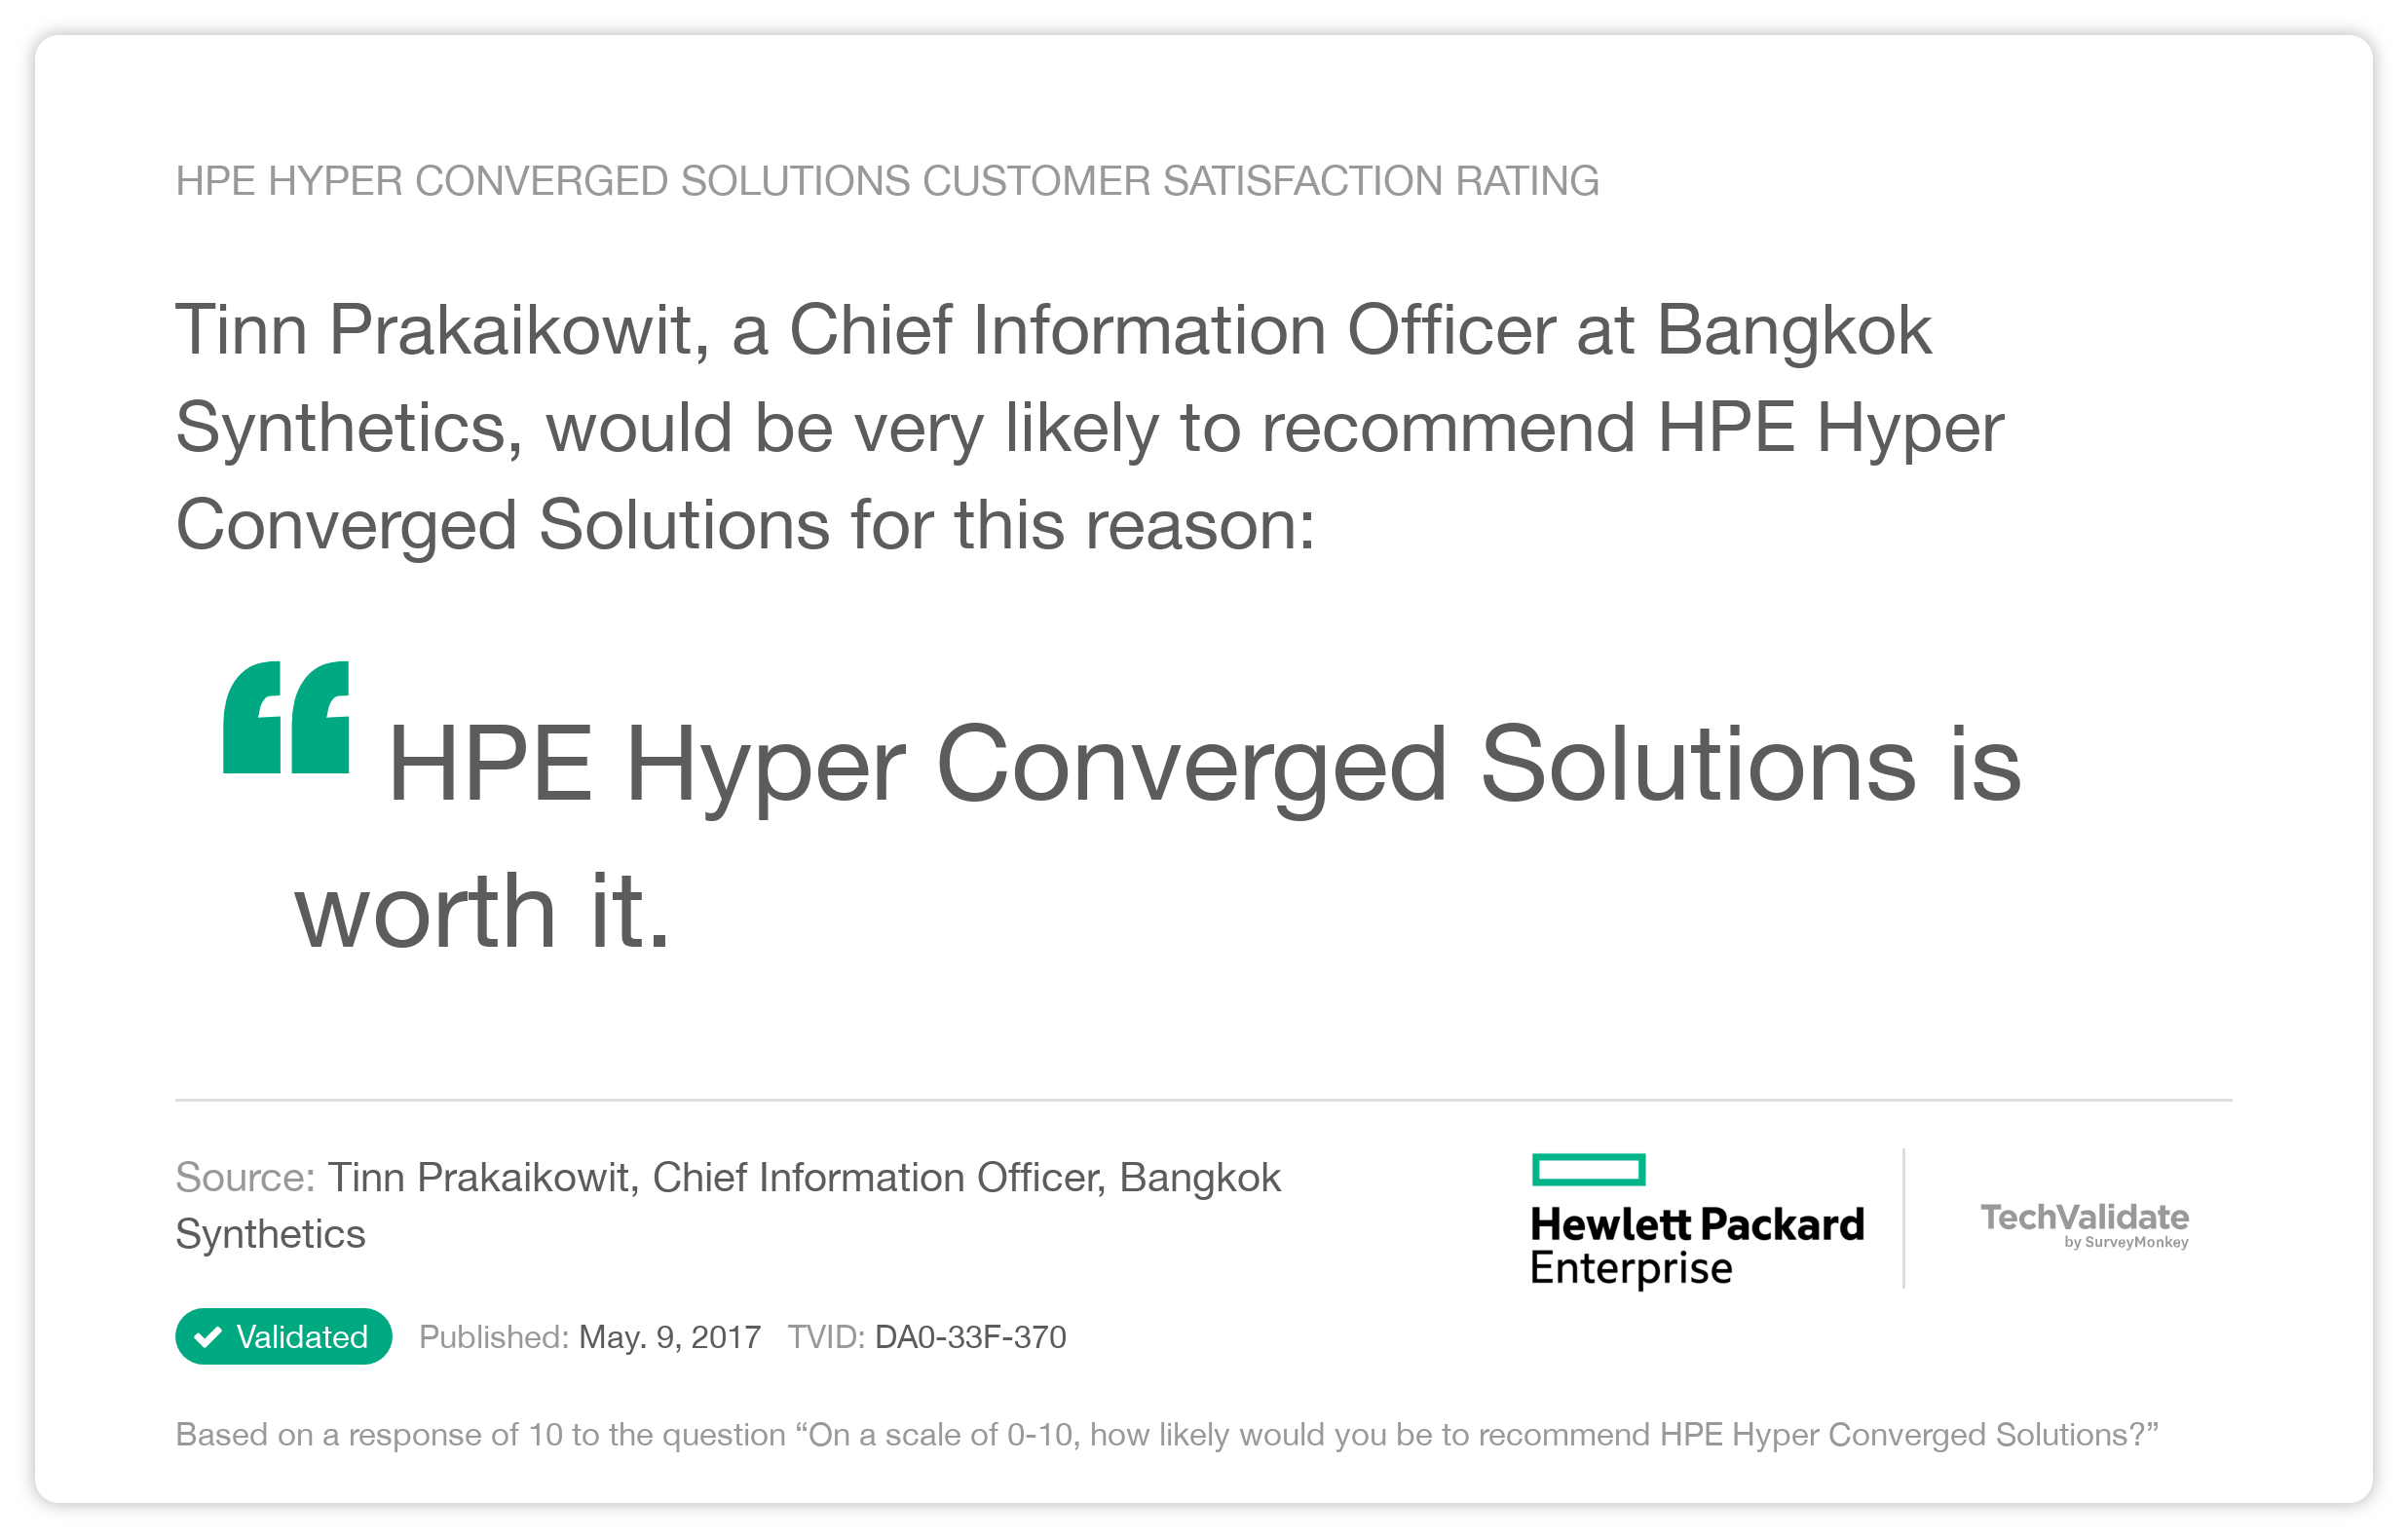 HPE Hyper Converged Solutions Customer Satisfaction Rating